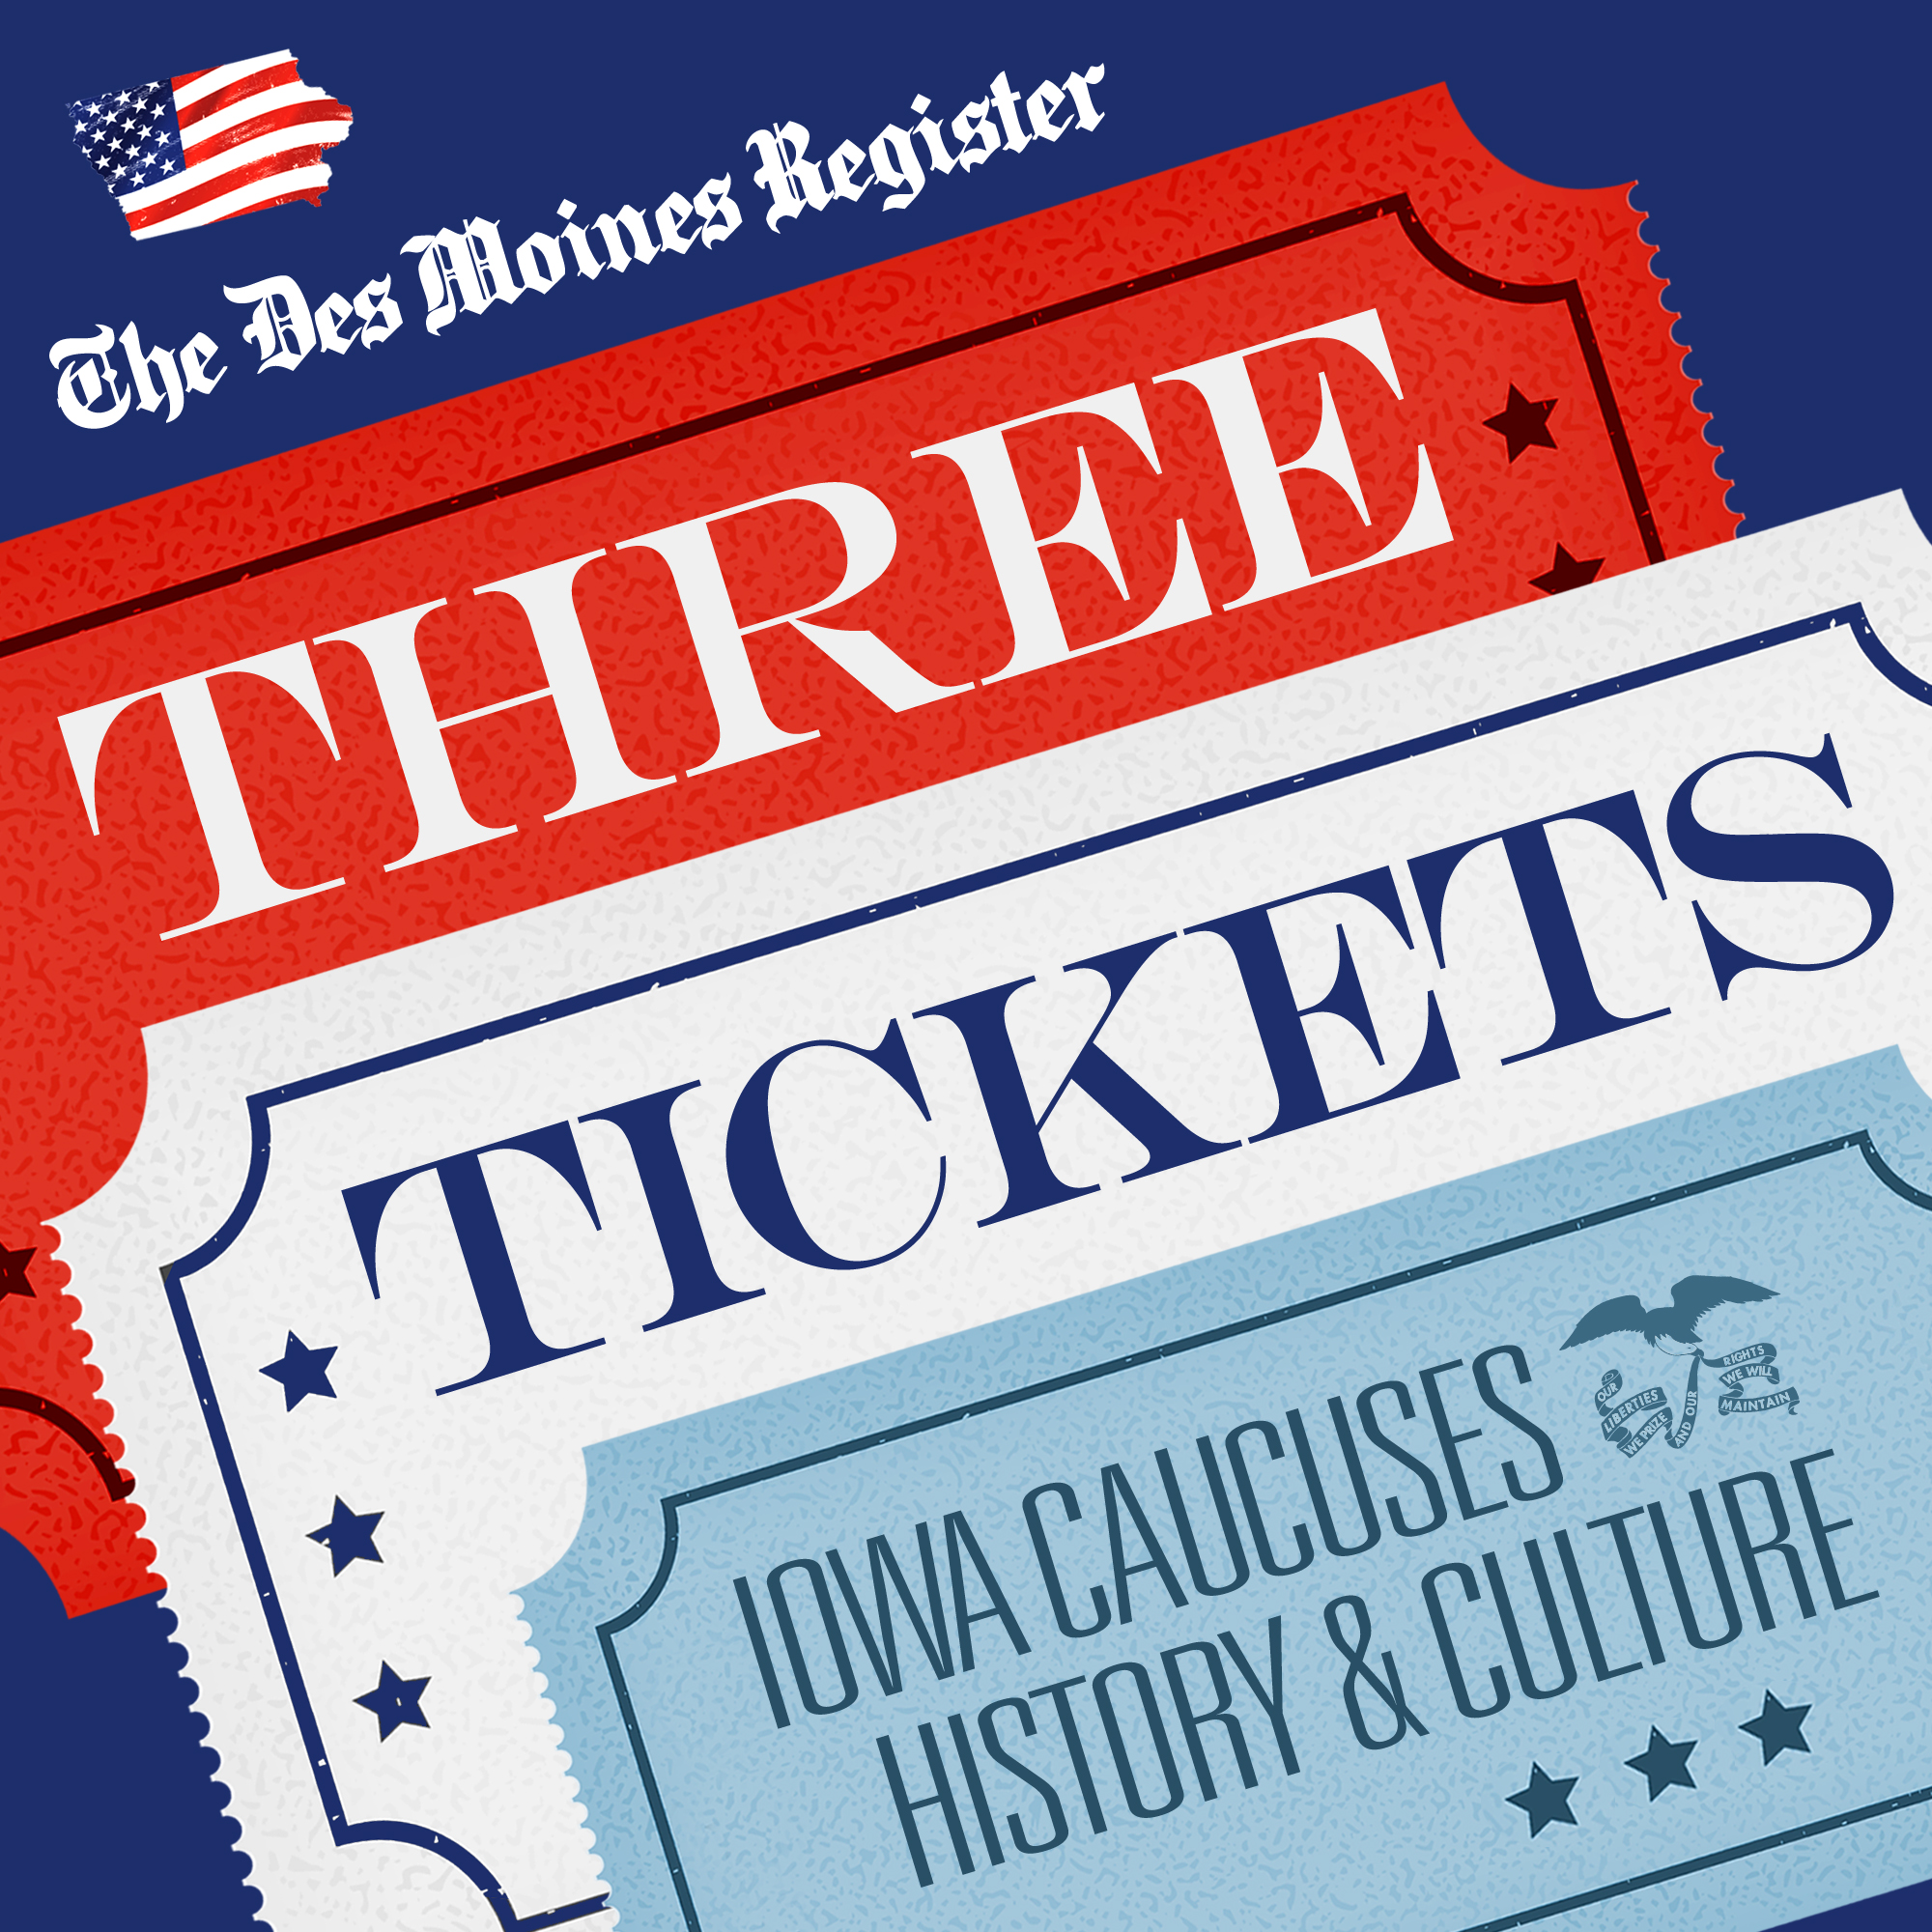 Three Tickets podcast is available at DesMoinesRegister.com.